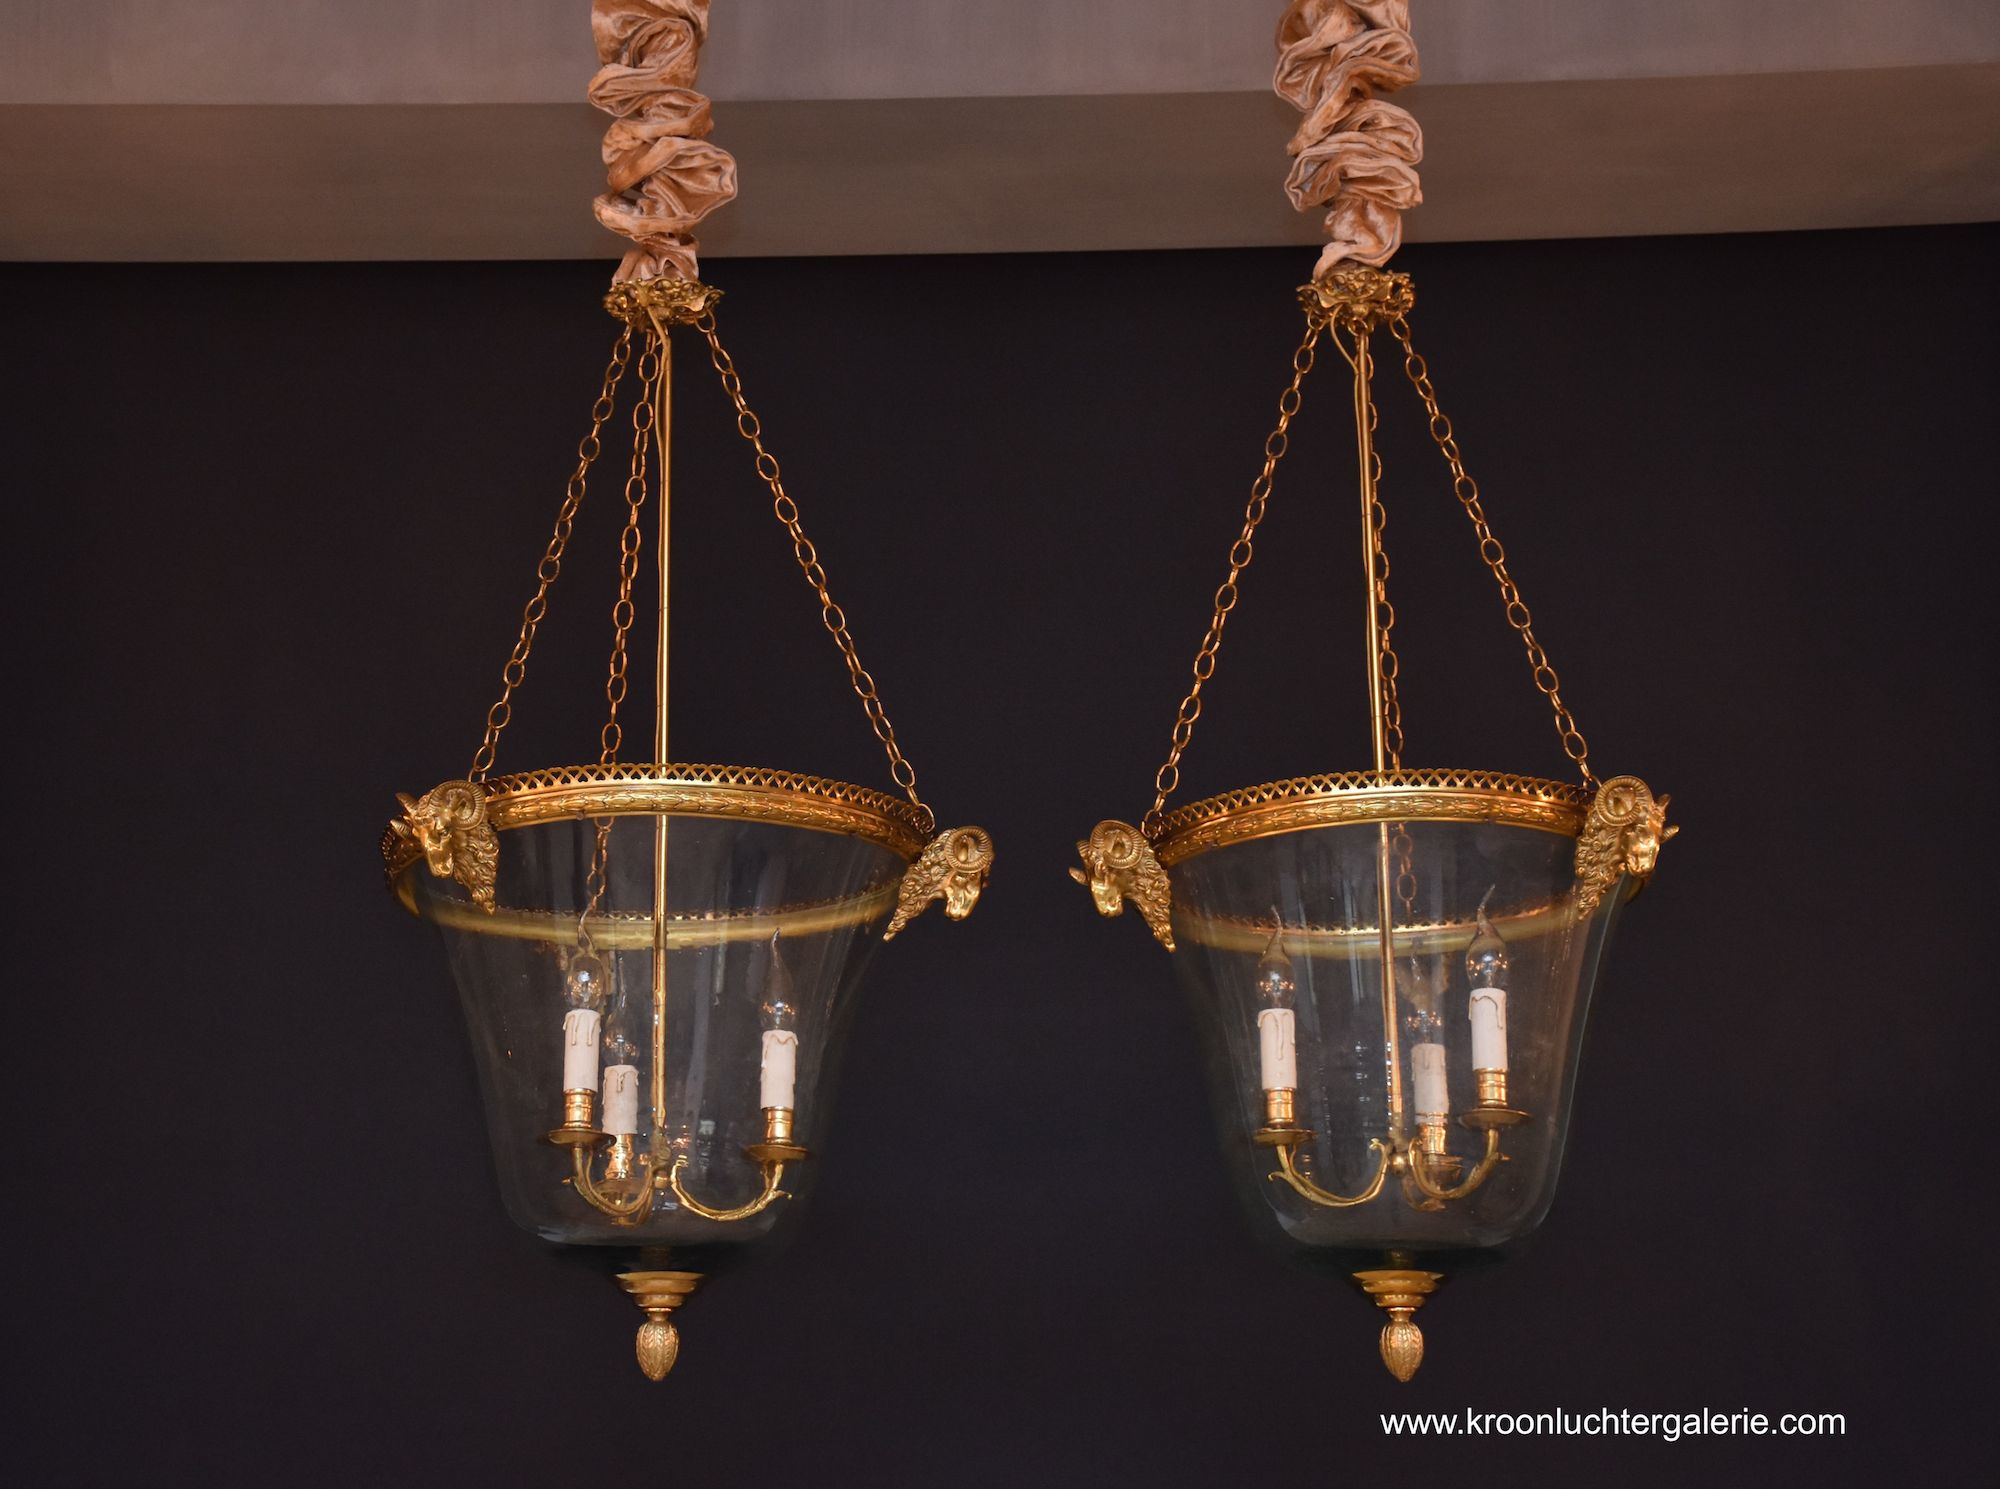 A beautiful pair of neoclassical French lamps